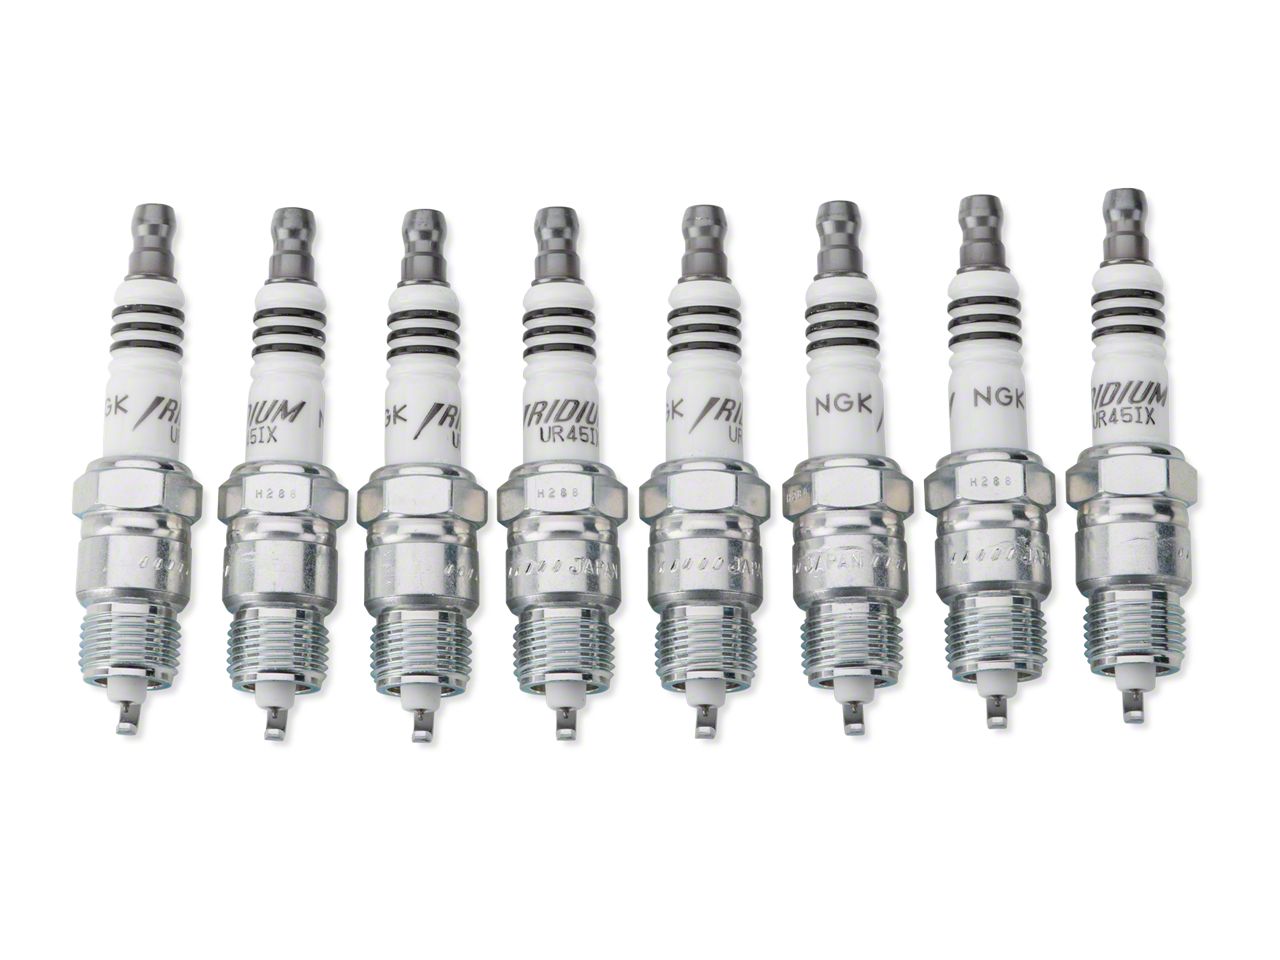 Mustang Spark Plugs and Spark Plug Wires 1979-1993